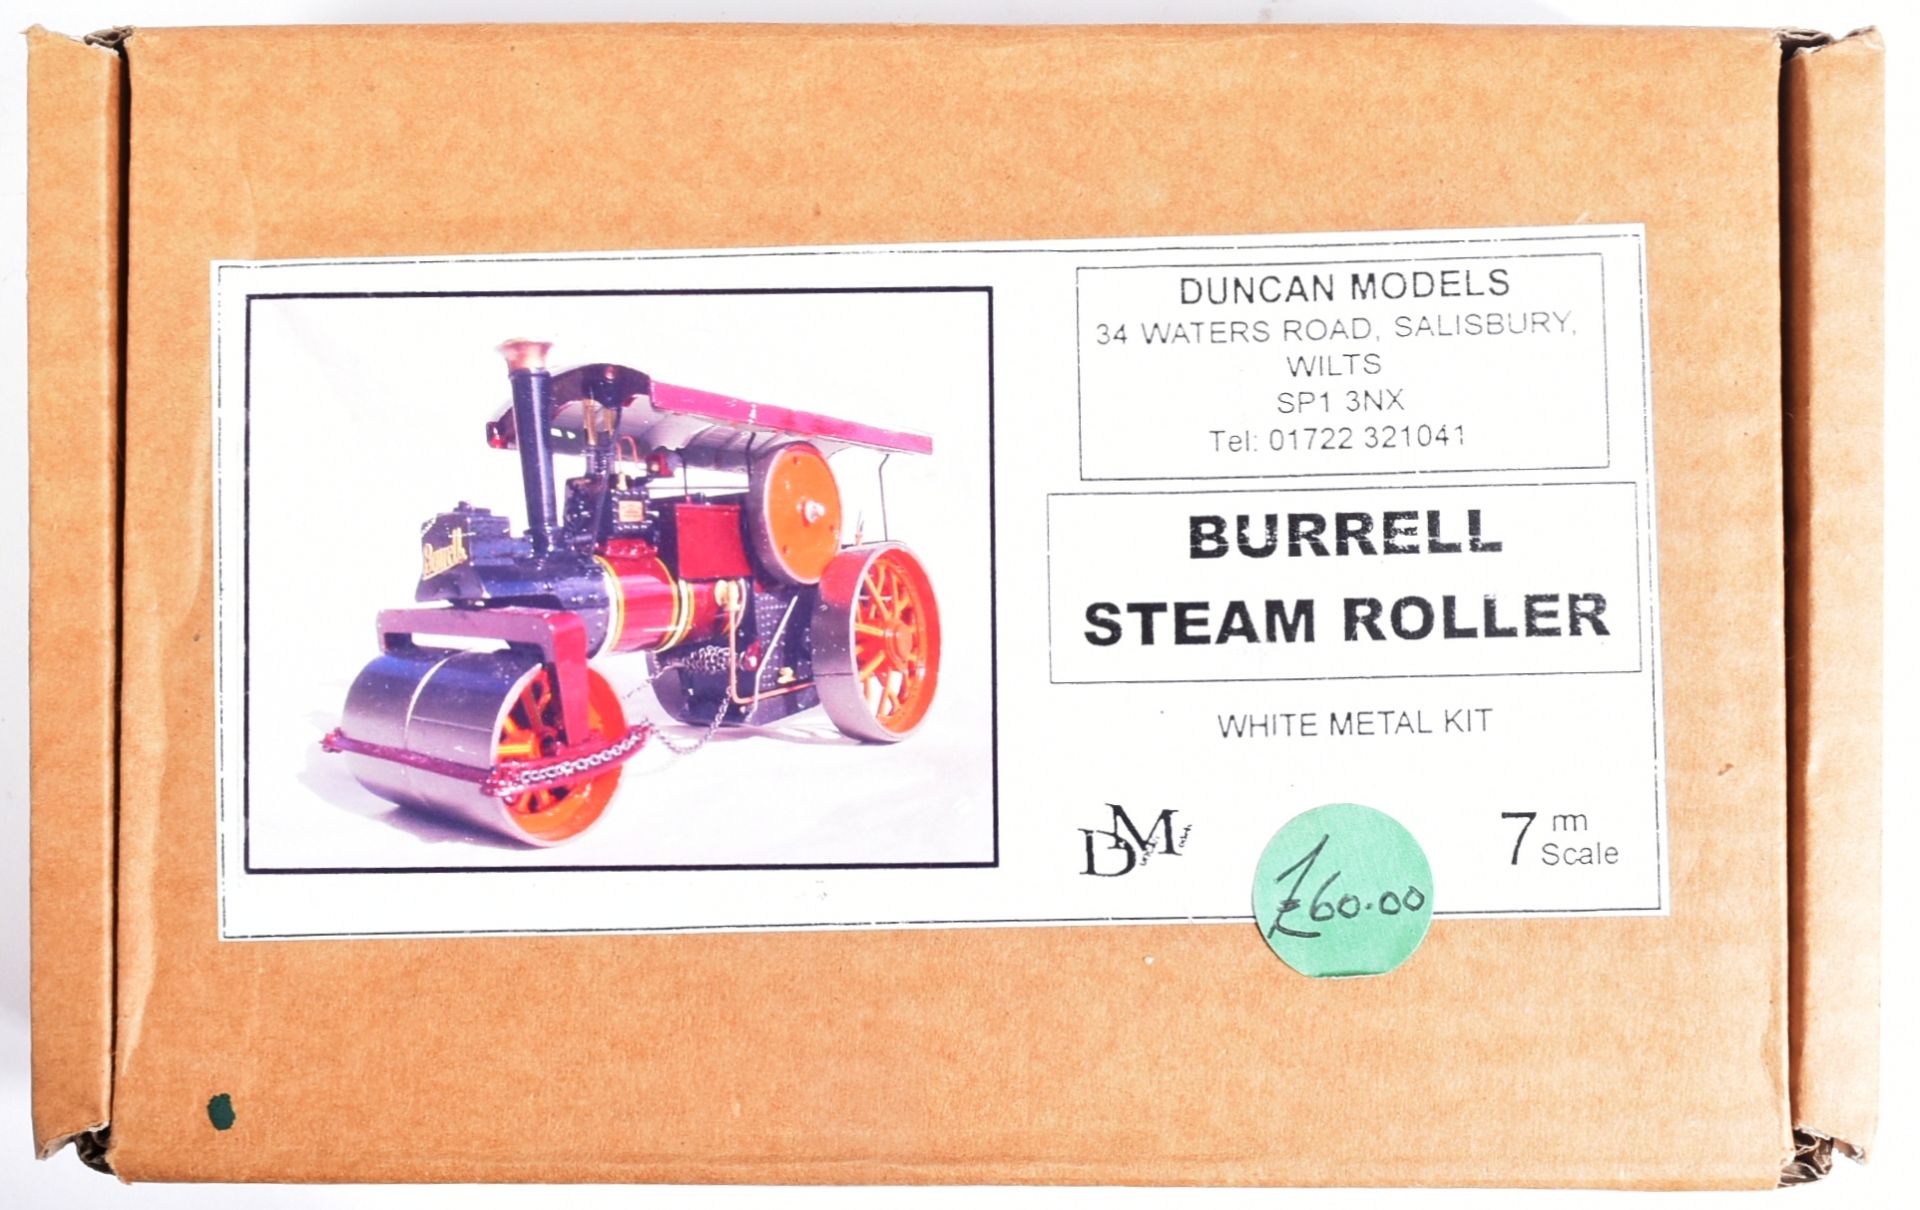 WHITE METAL KITS - X2 DUNCAN MODELS STEAM ROLLERS - Image 2 of 5